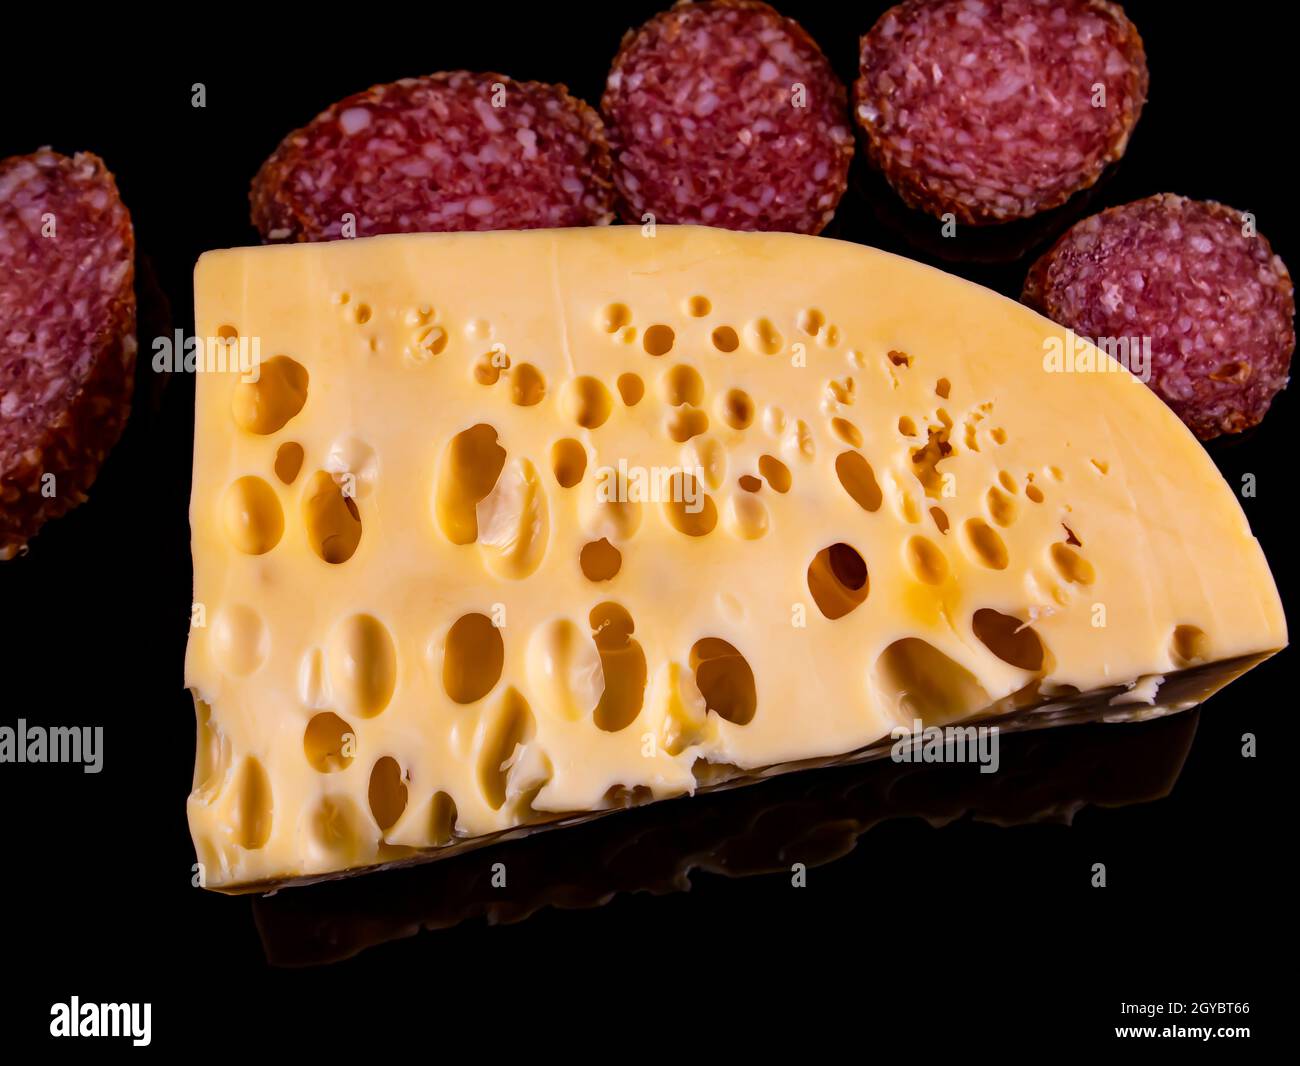 A piece of hard cheese and a sliced sausage on a black background. Hard cheeses. Meat sausage. Milk product. Meat sausages. Dairy products. Home kitch Stock Photo